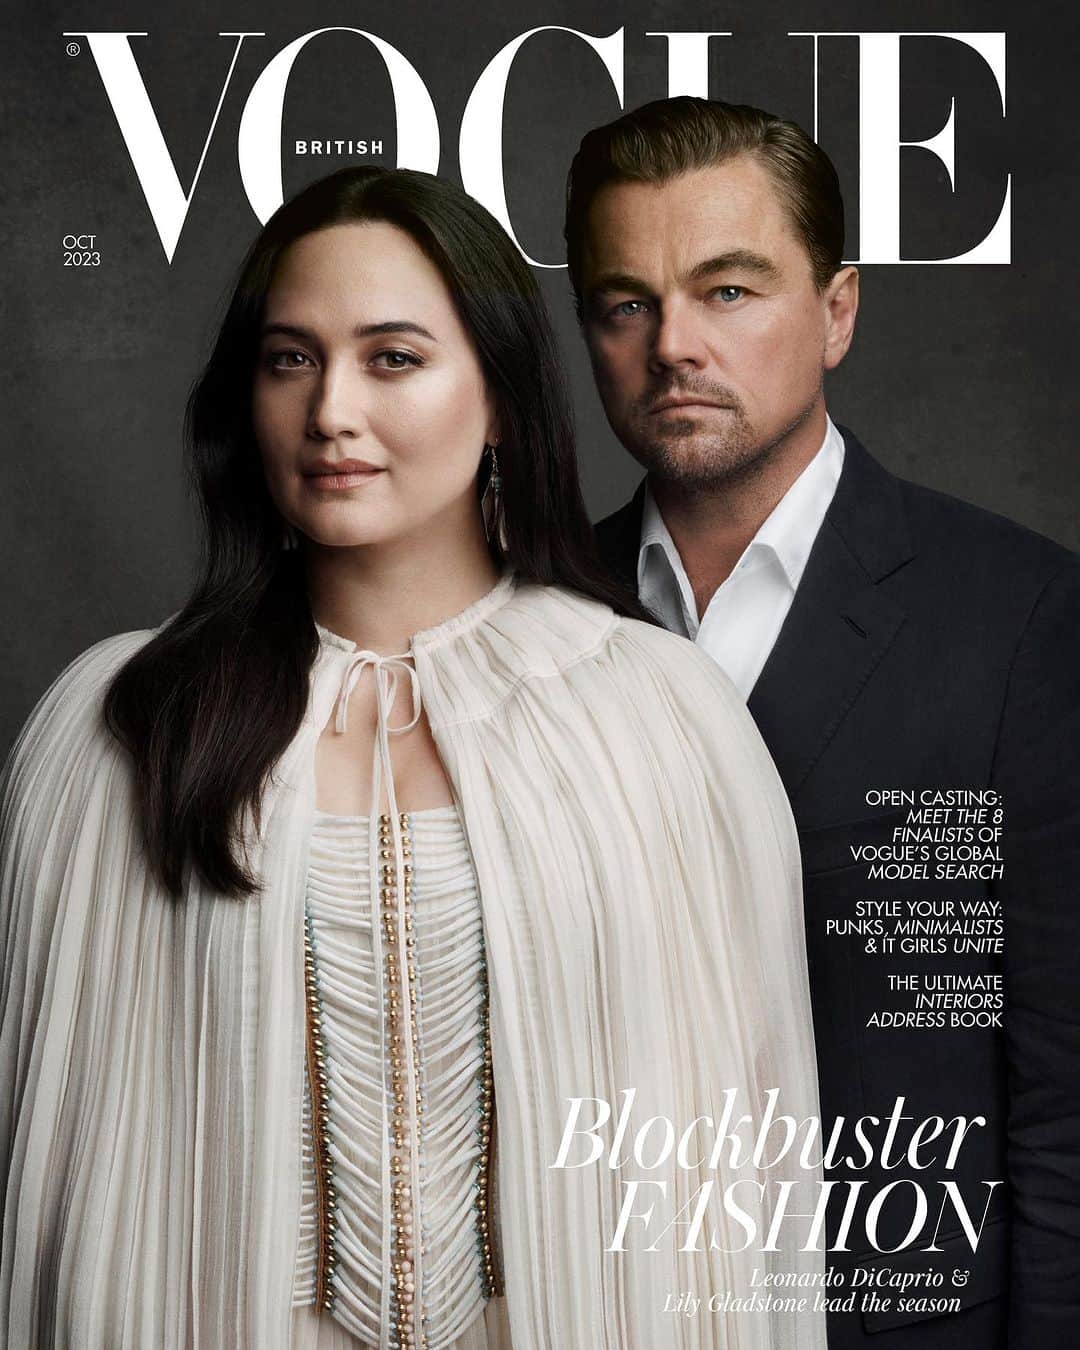 Kara Yoshimoto Buaのインスタグラム：「Killers of the Flower Moon Premiering on October 20th...loved being a part of this special cover promoting a film of this magnitude that gives voice to those previously unheard.  #LilyGladstone and #LeonardoDiCaprio photographed by @CraigMcDeanStudio,  styled by @Edward_Enninful, Lily Gladstone’s hair by @HairByOrlandoPita, make-up by @PatMcGrathReal, Leonardo DiCaprio’s grooming by @KaraYoshimotoBua, nails by @JinSoonChoi, set design by @MaryHoward_SetDesign,  entertainment director-at-large @JillDemling, production by @Prodn_ArtAndCommerce, and special thanks to Hook Props for the October 2023 issue of @britishvogue 🖤 • • •  #mensgroomingbykarayoshimotobua #simplebeautybykara #britishvoguecover #killersoftheflowermoon #leonardodicaprio #leodicaprio #lilygladstone #martinscorsese」